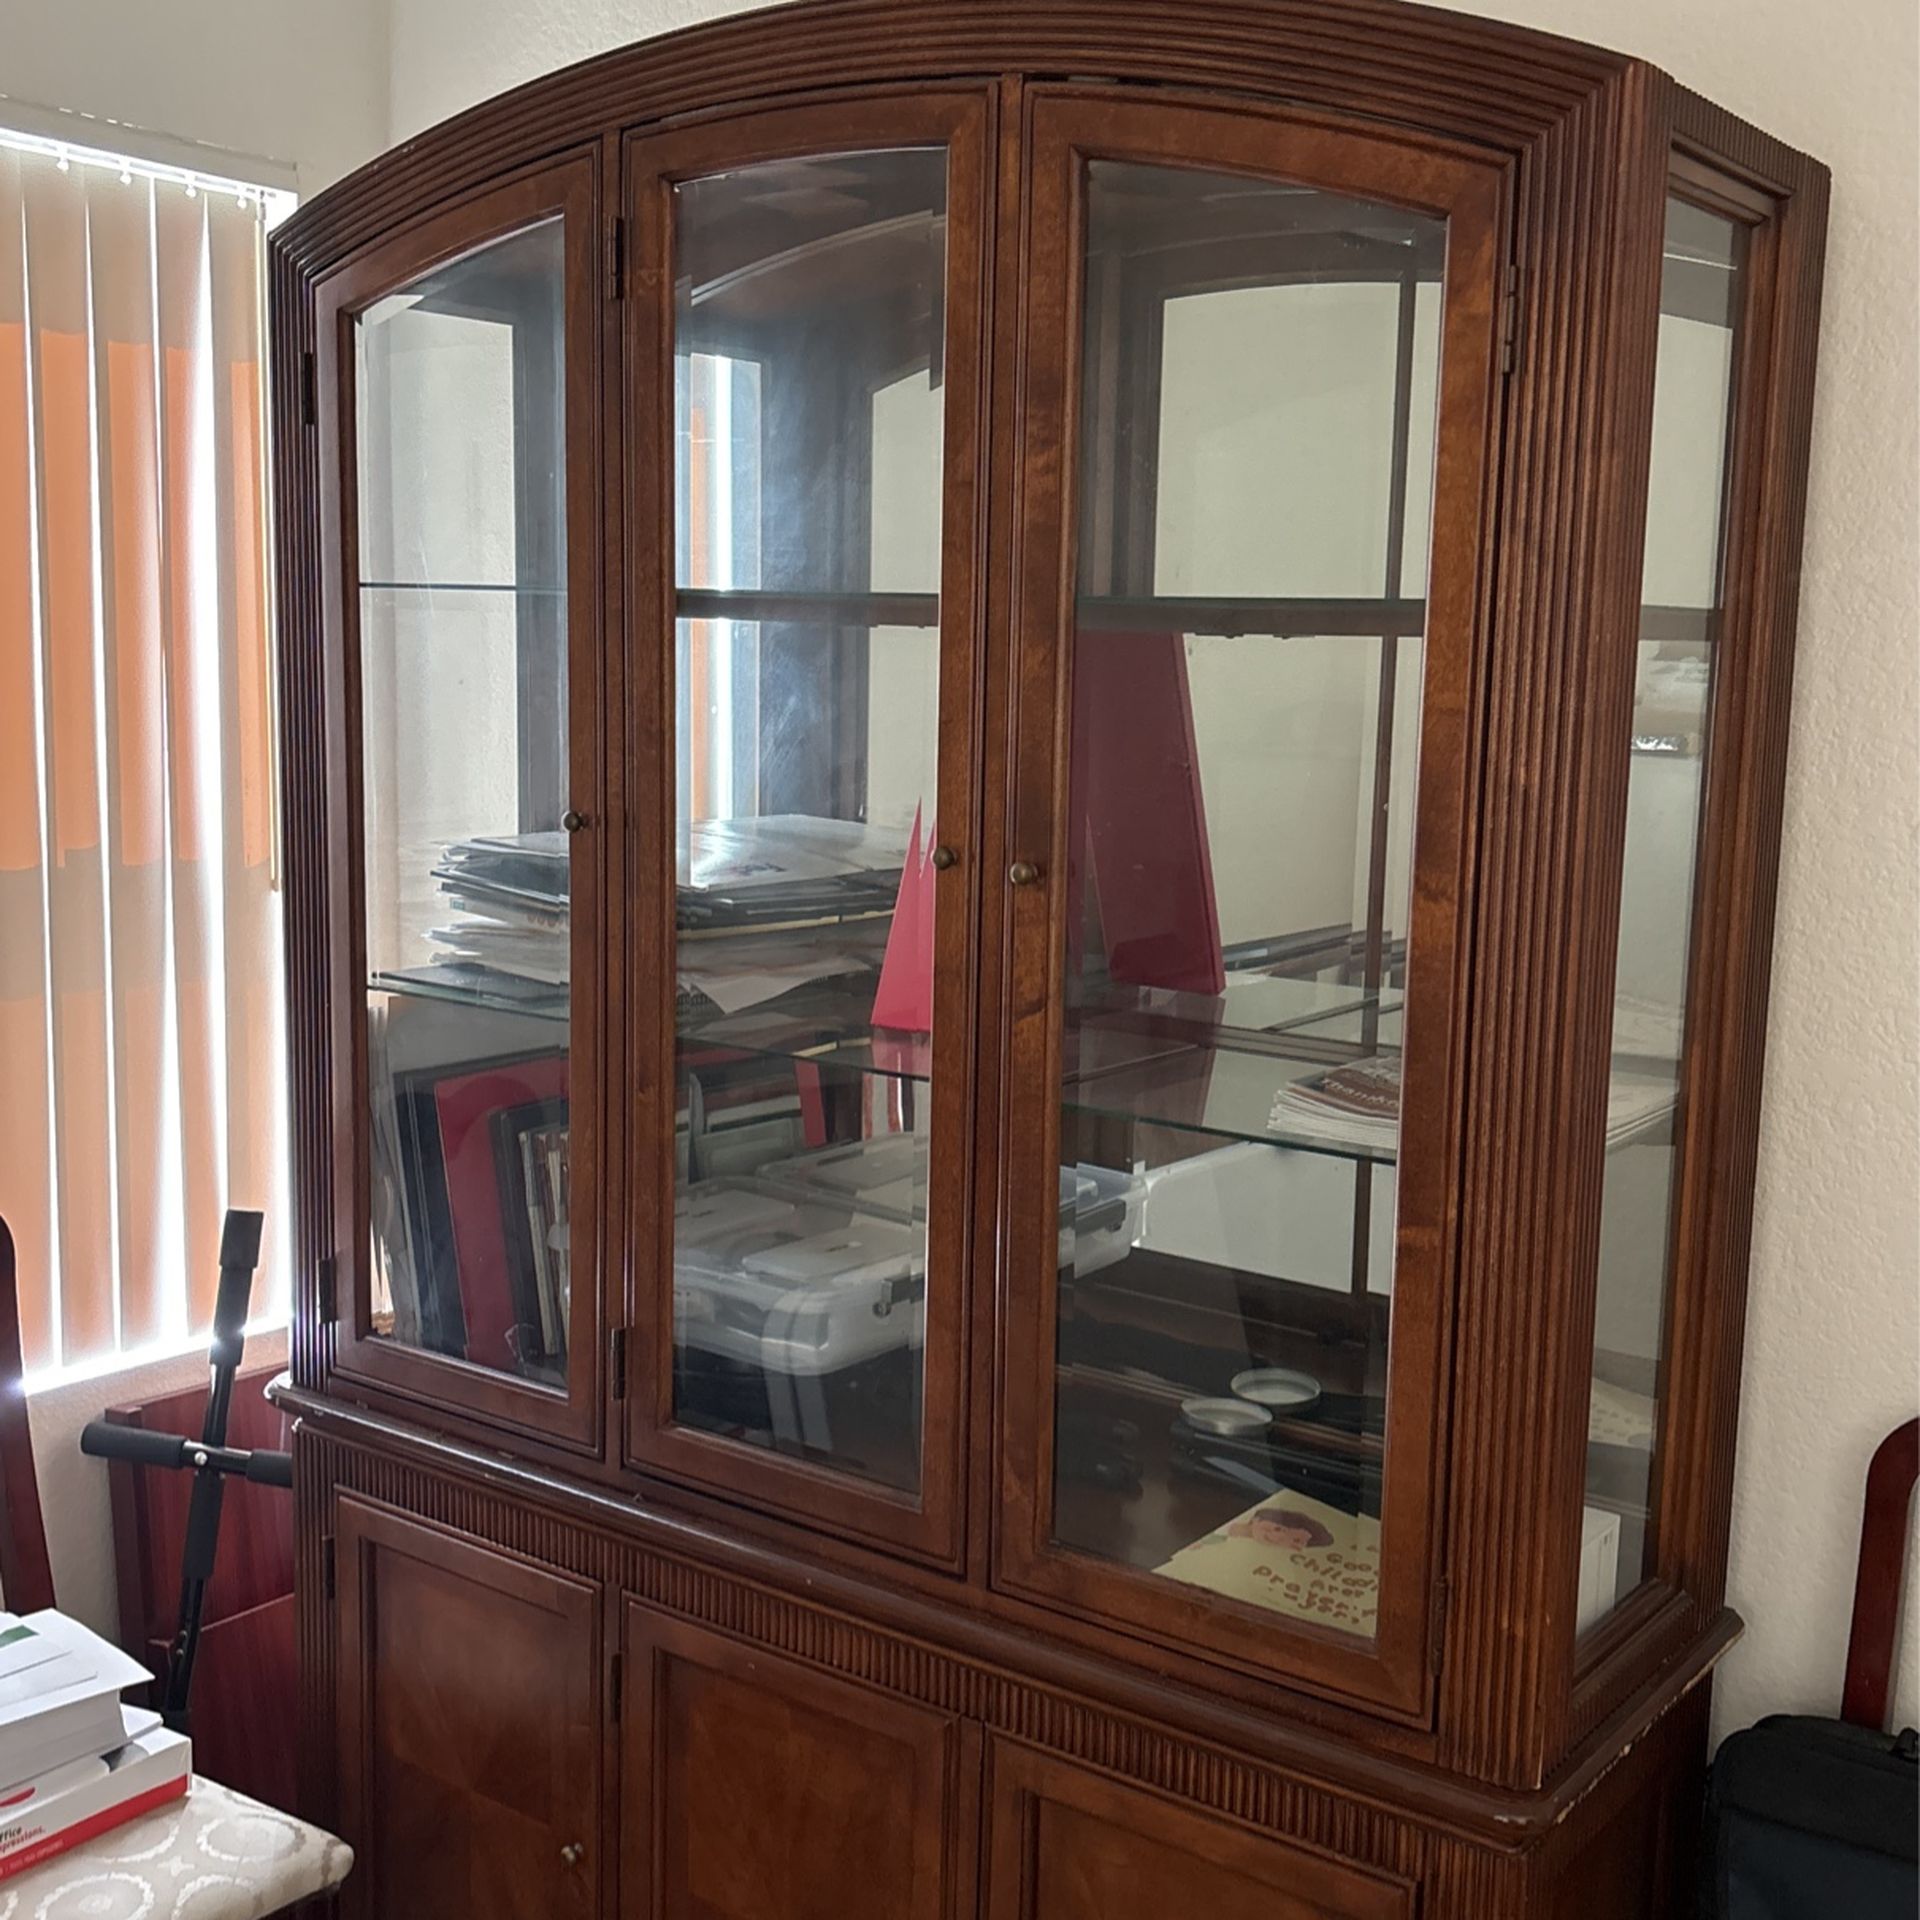 China cabinet - Free If You Can pick It Up